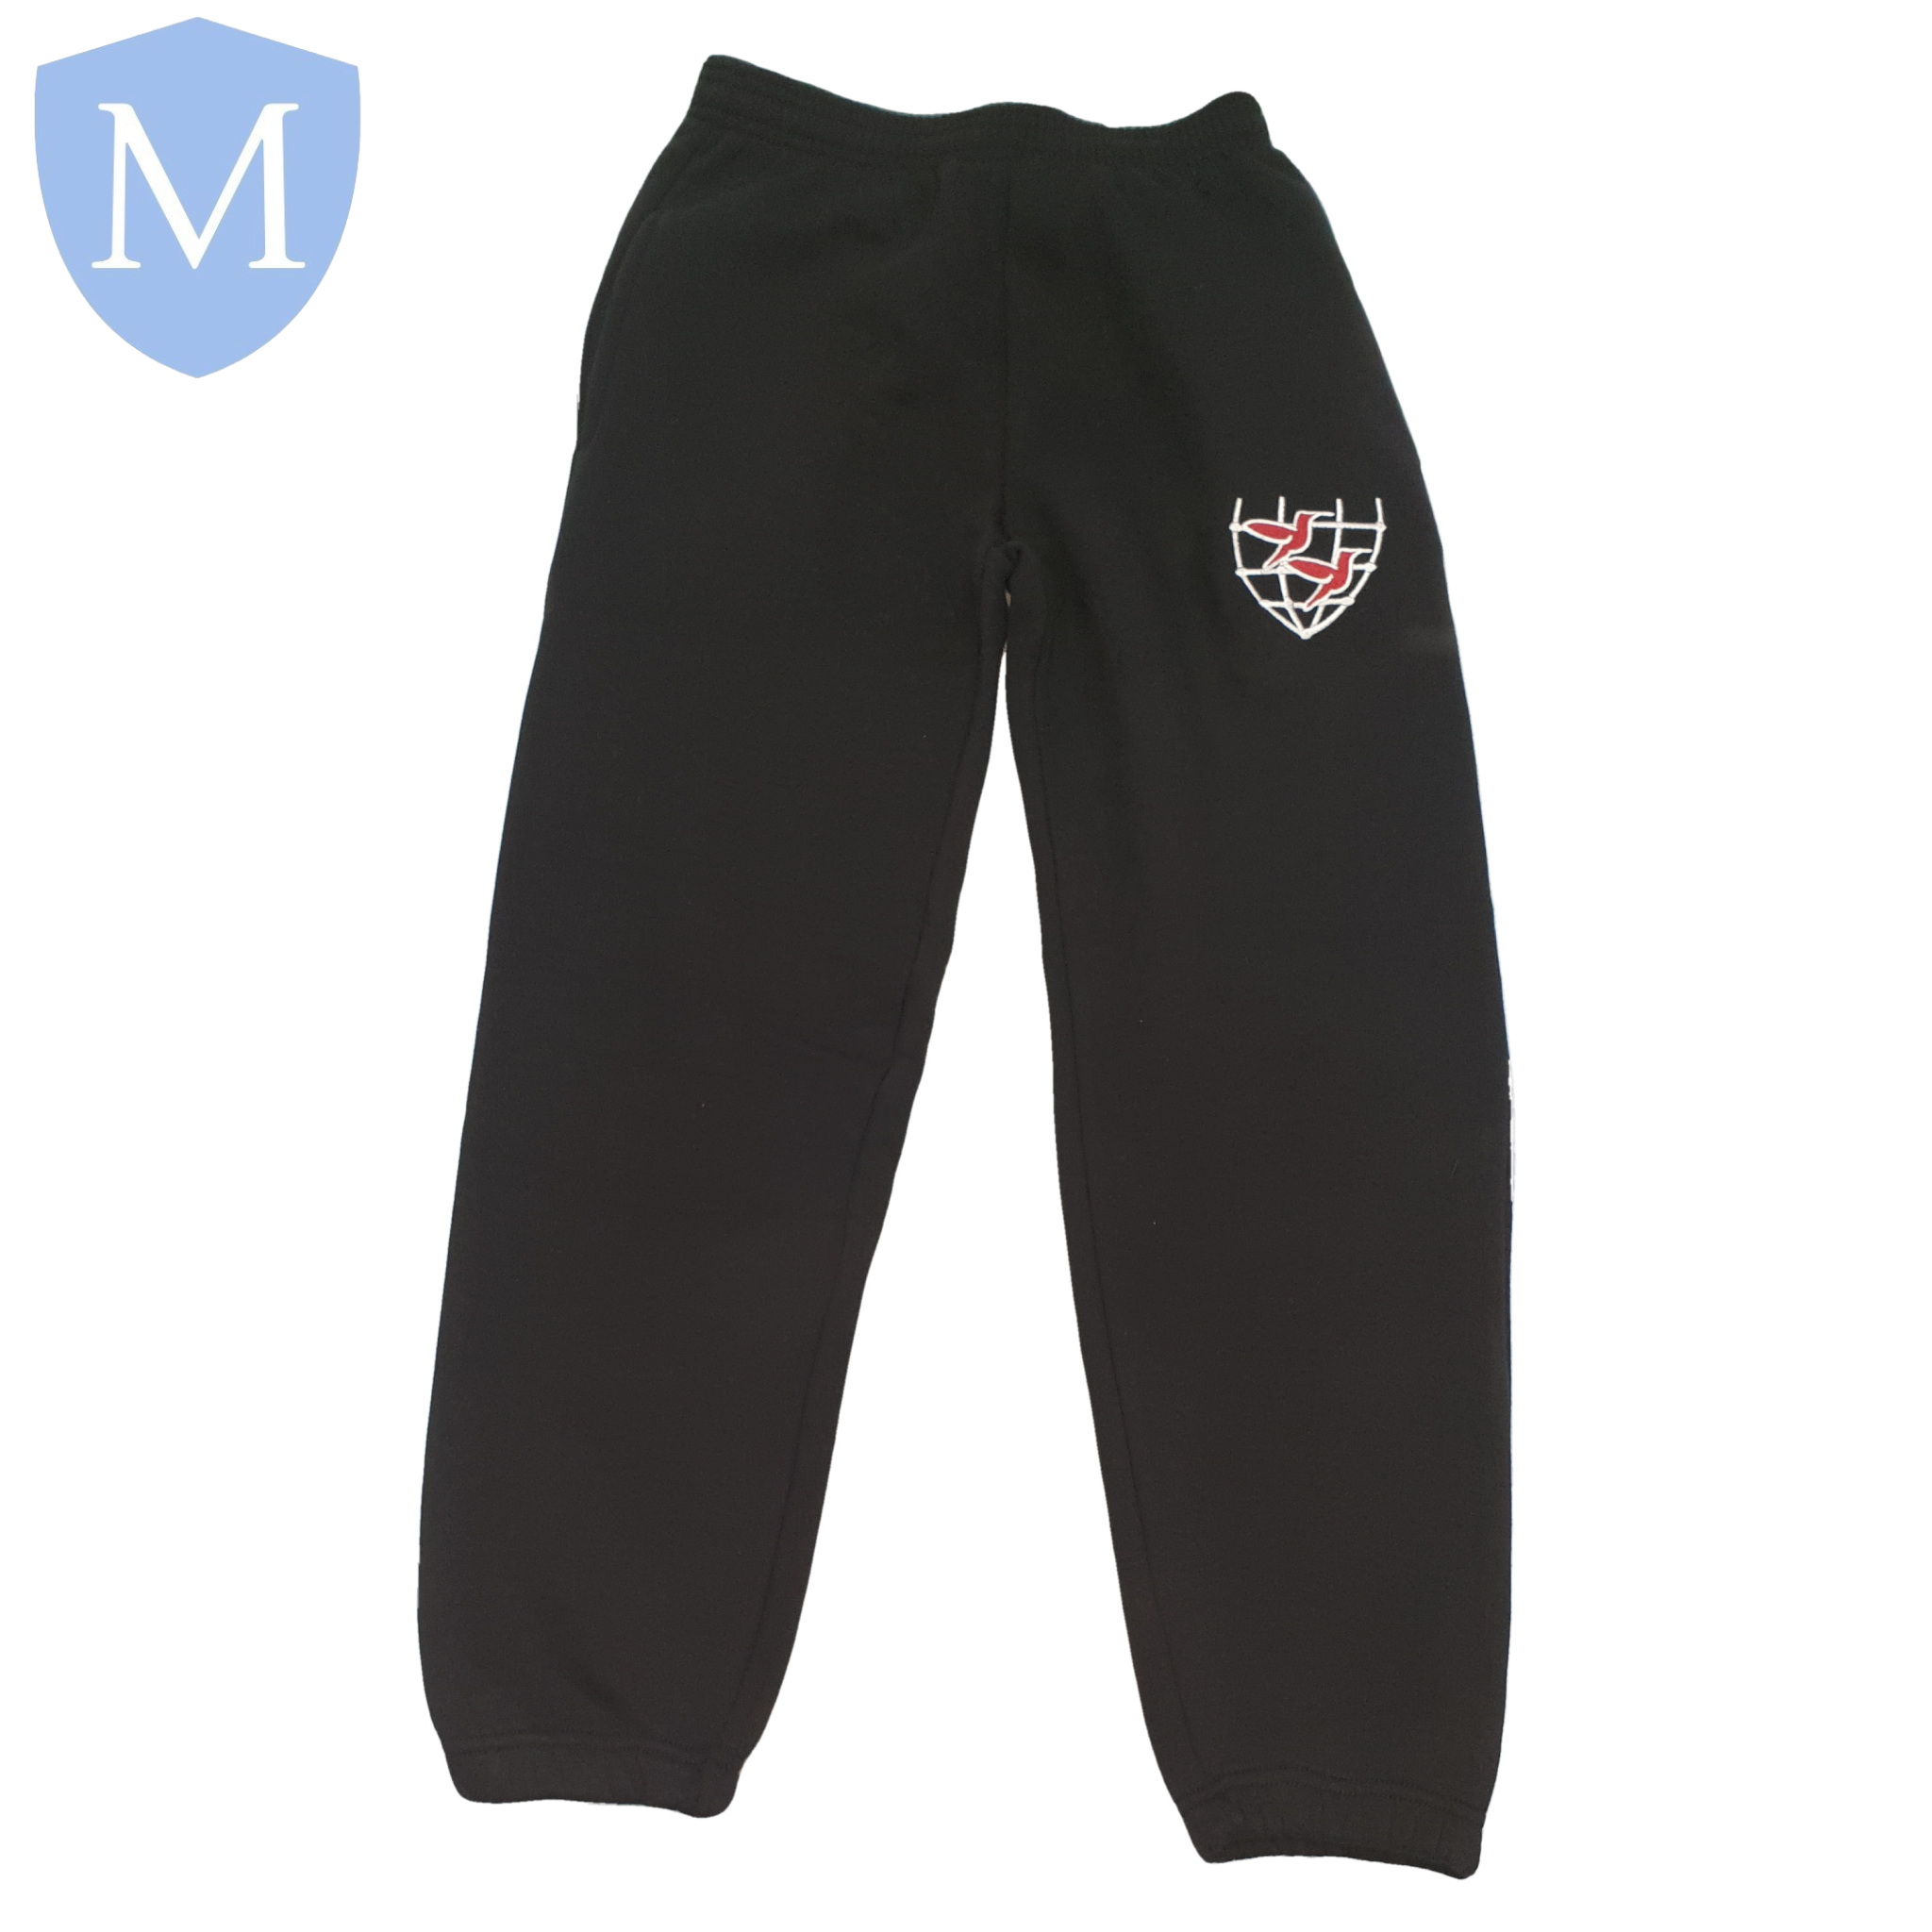 Cockshut Hill Jogging Bottoms 9-10 Years,11-12 Years,13-14 Years,Large,Medium,Small,X-Large